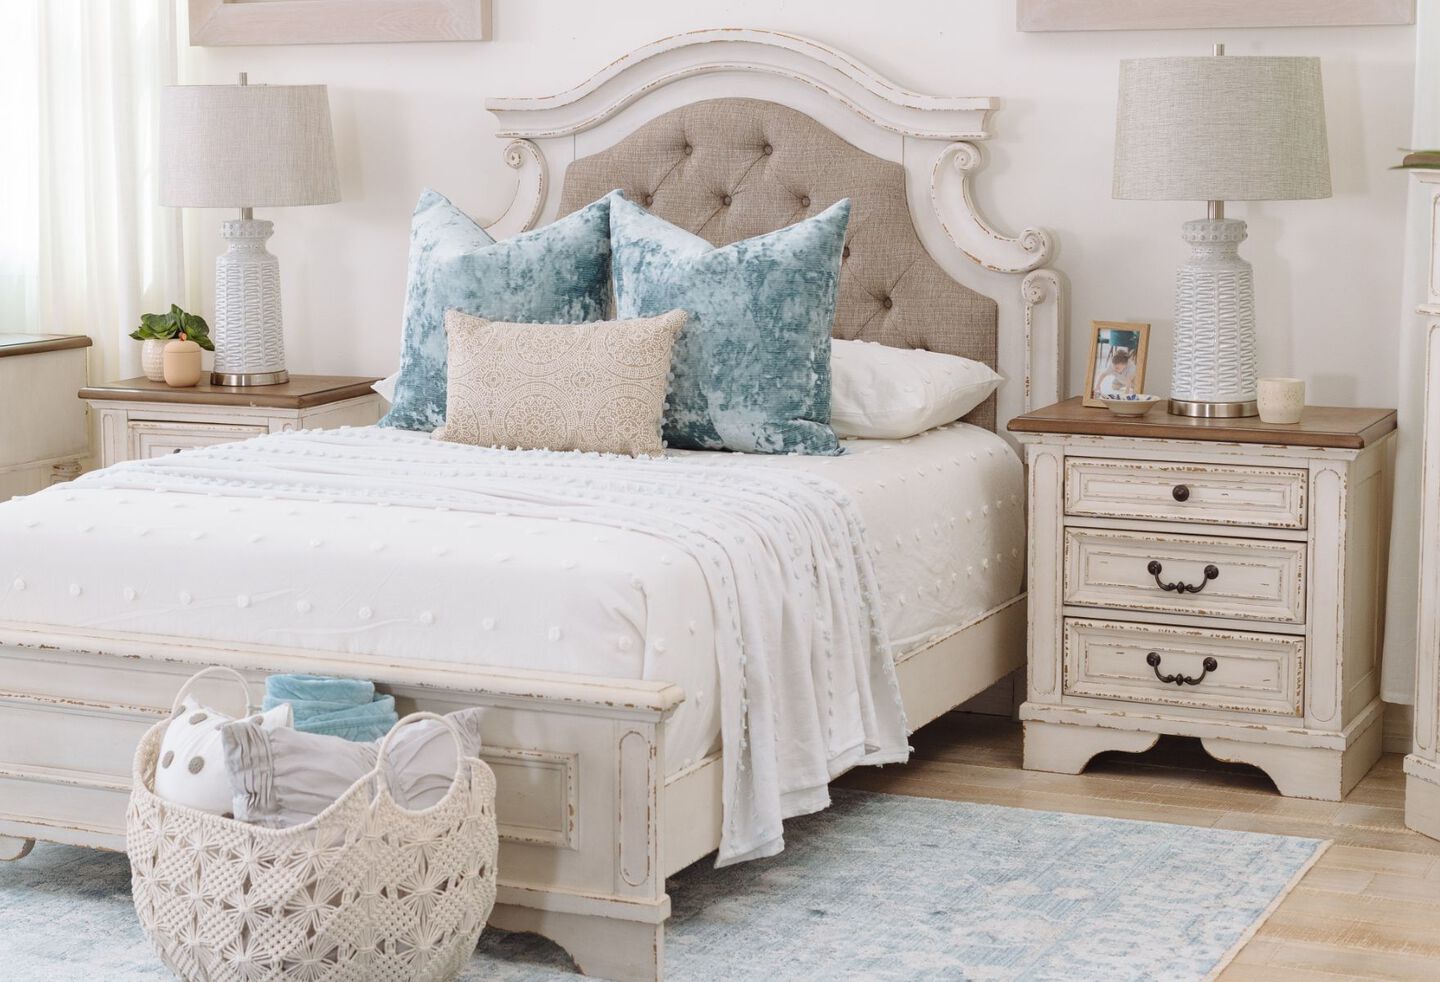 Bedroom with off-white bed with blue and tan pillows and a light wooden nightstand